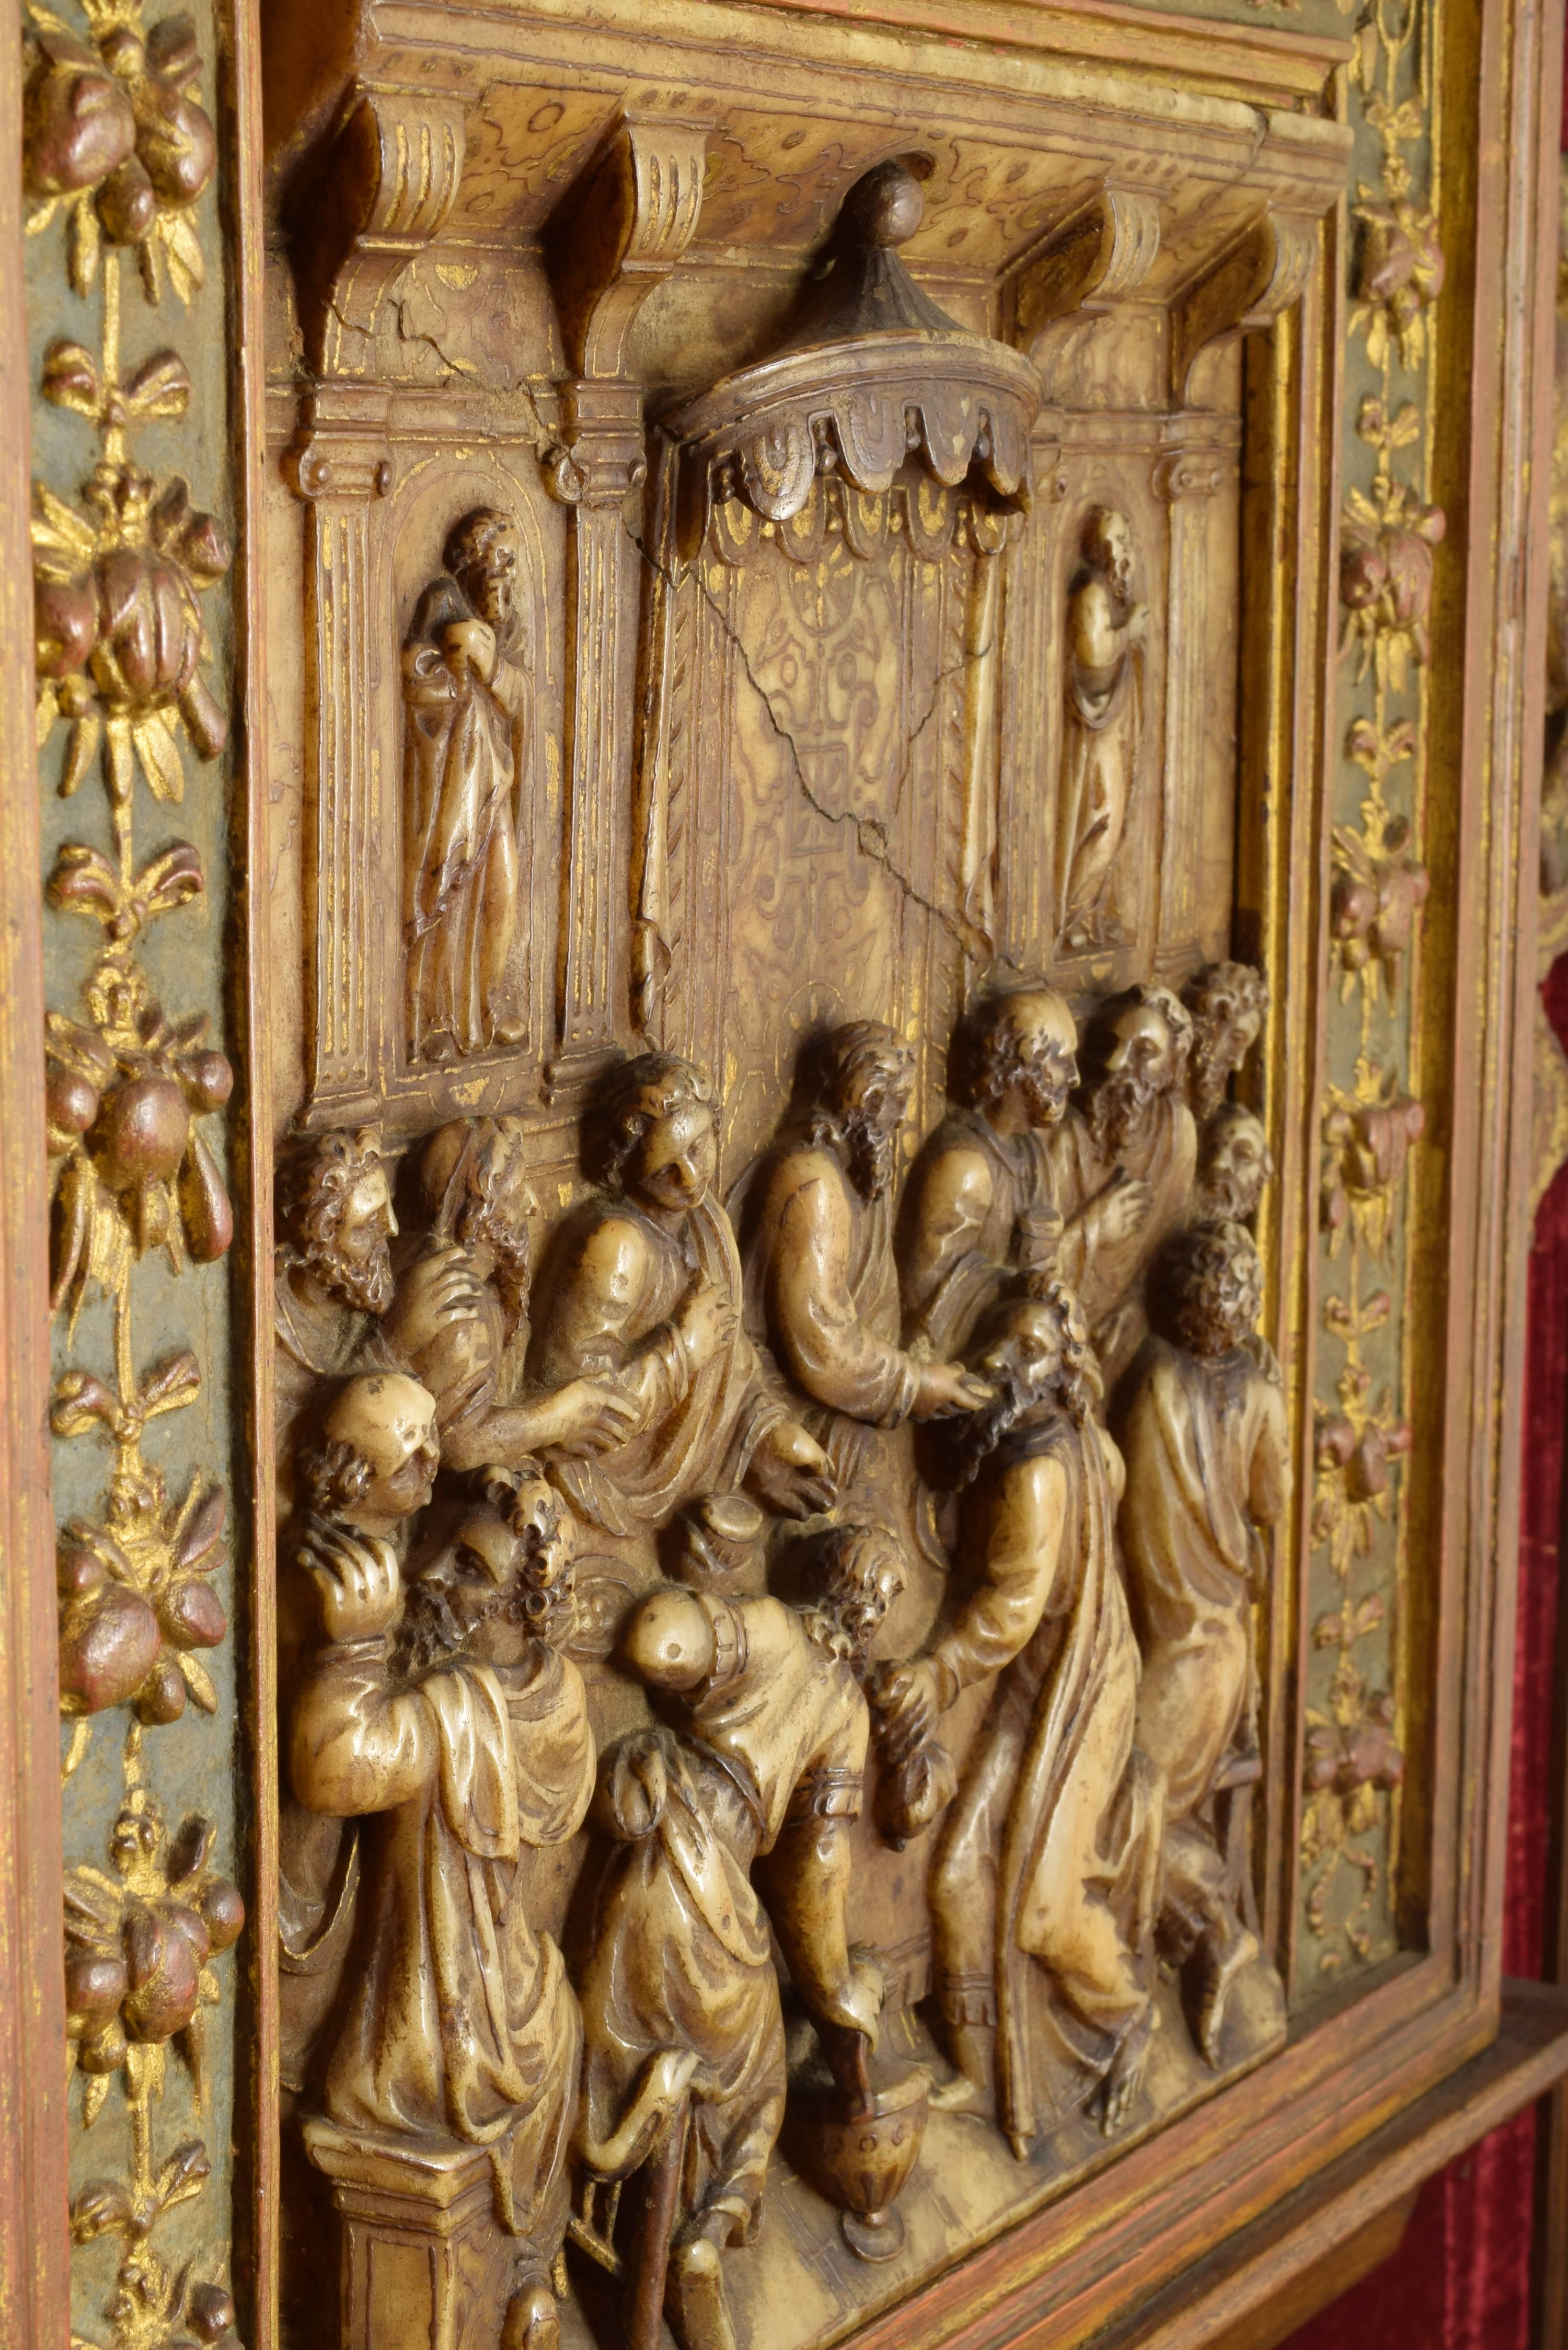 18th Century and Earlier Domestic Altar, Alabaster and Wood, Possibly Malines ‘Mechelen’ Mid-16th Century